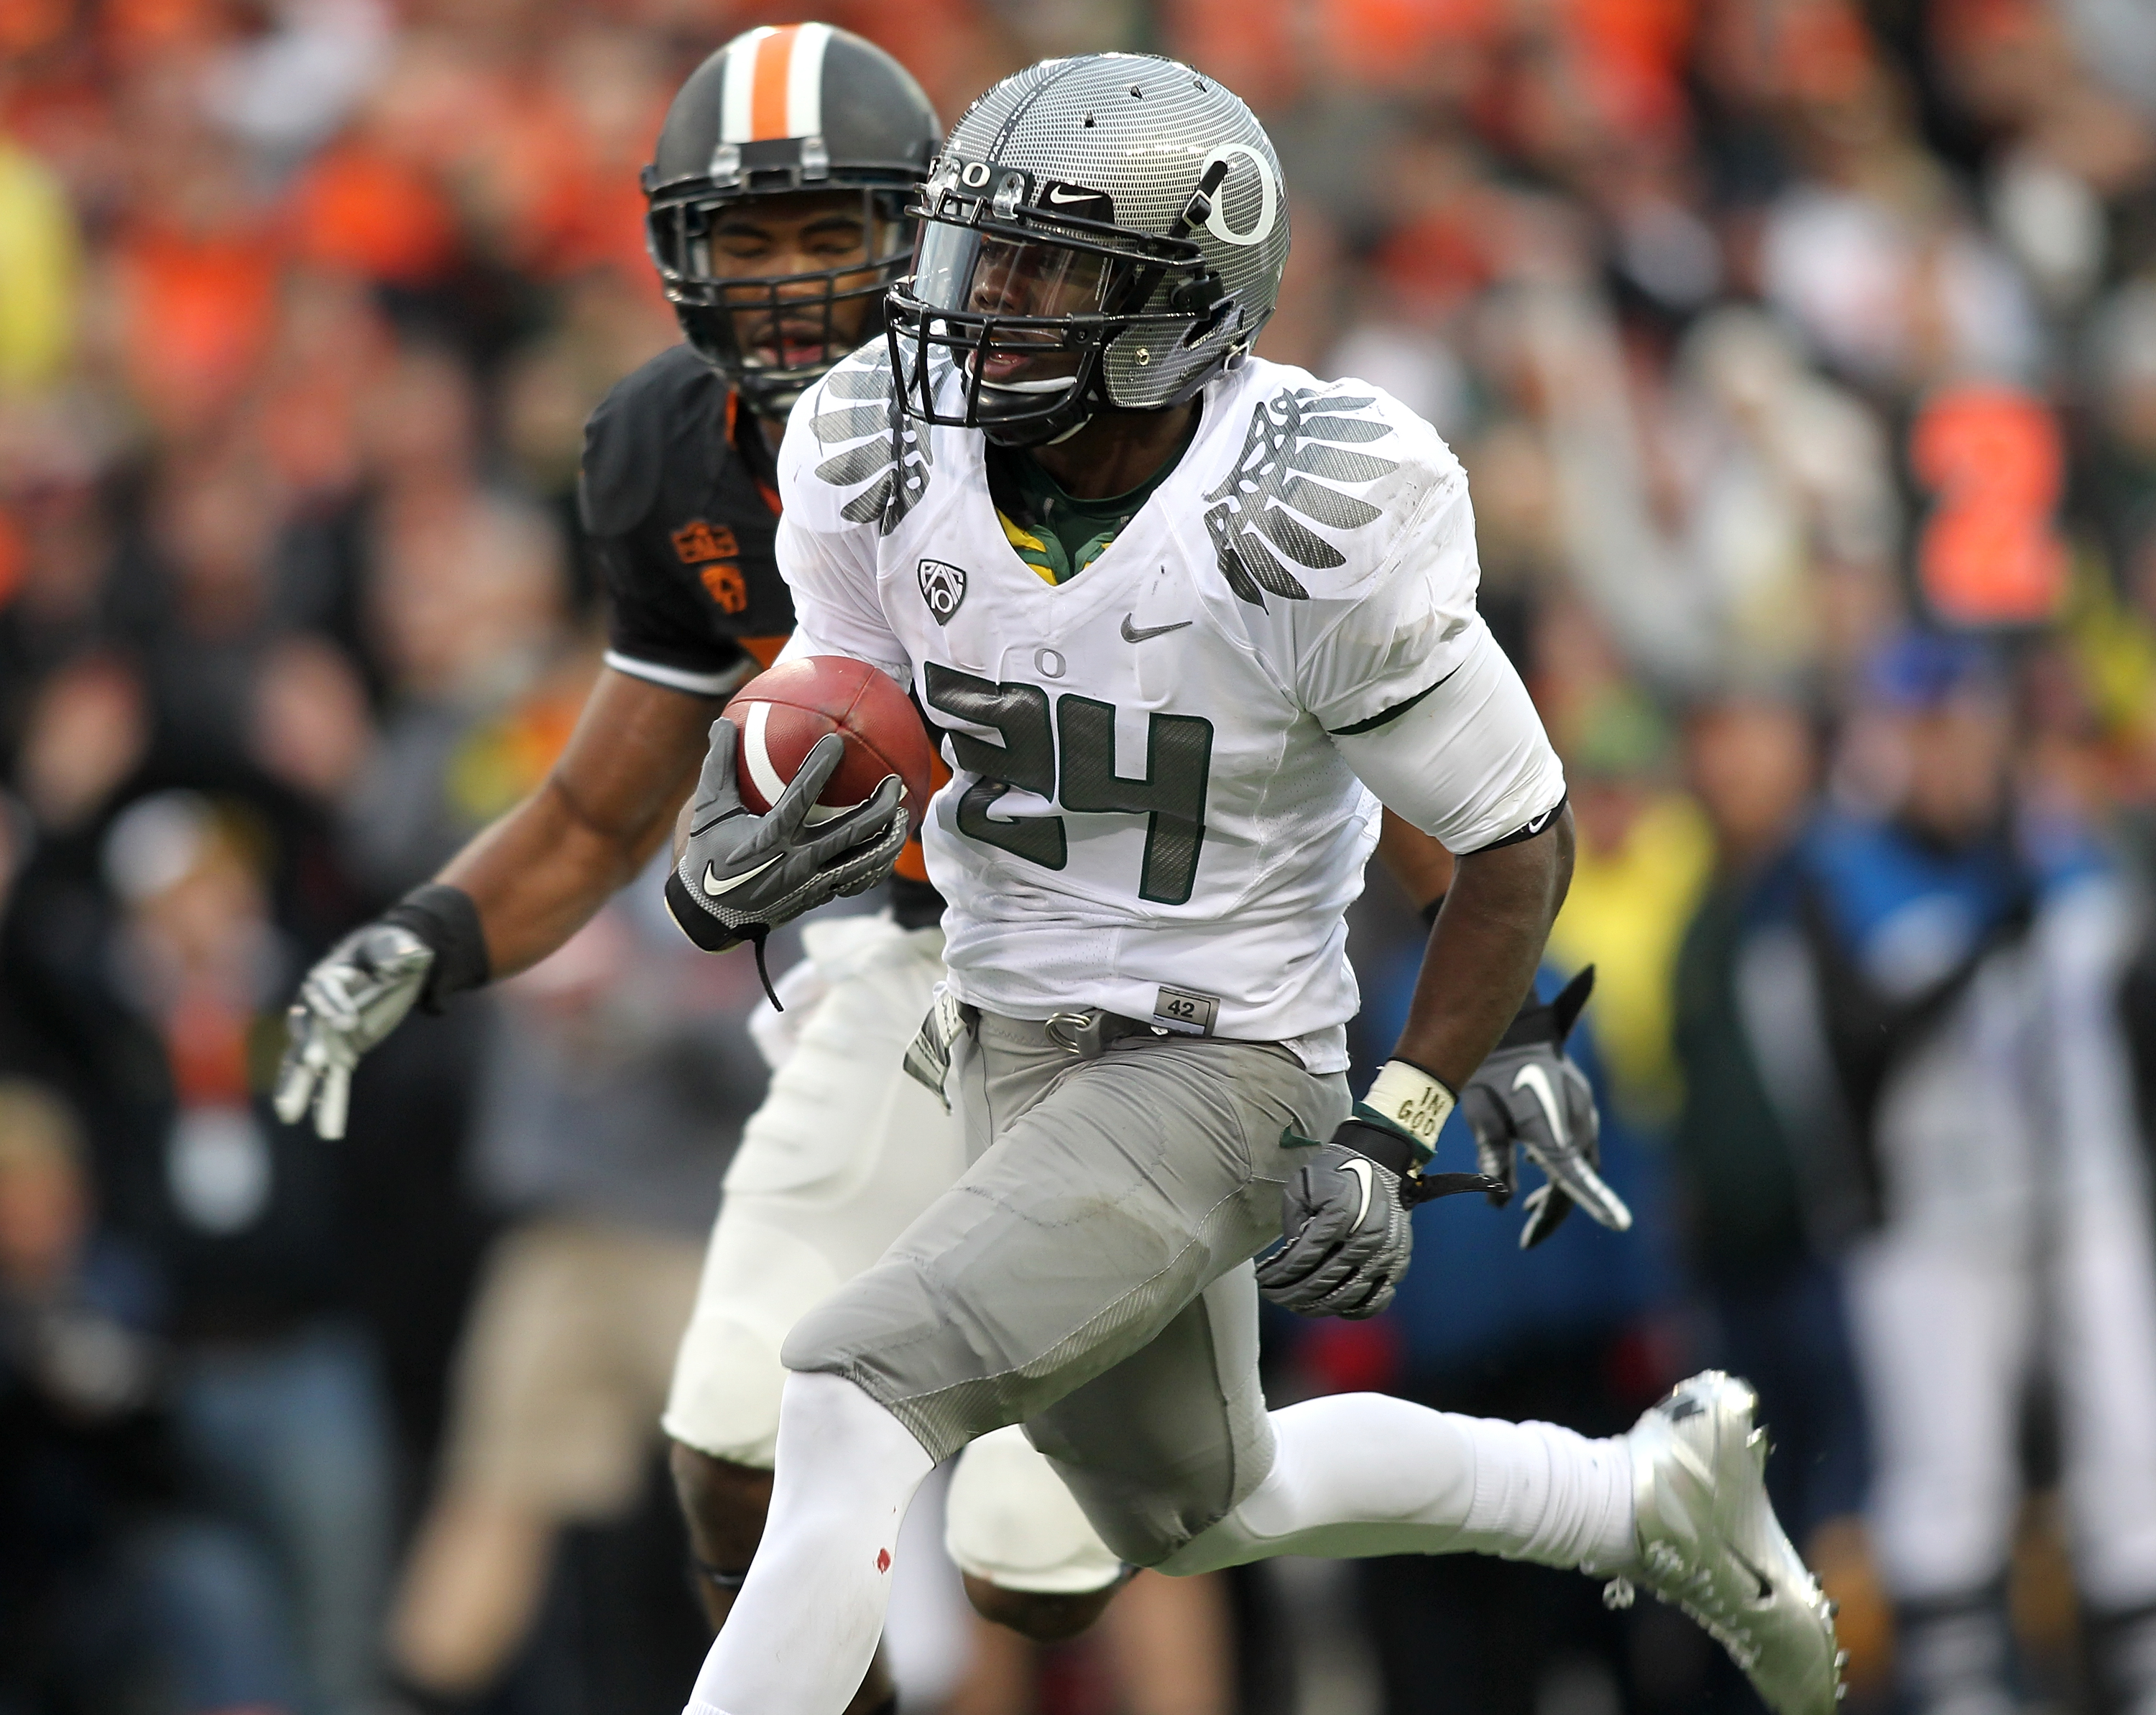 CORVALLIS, OR - DECEMBER 04:  Kenjon Barner #24 of the Oregon Ducks runs for a touchdown against the Oregon State Beavers during the 114th Civil War on December 4, 2010 at the Reser Stadium in Corvallis, Oregon.  (Photo by Jonathan Ferrey/Getty Images)